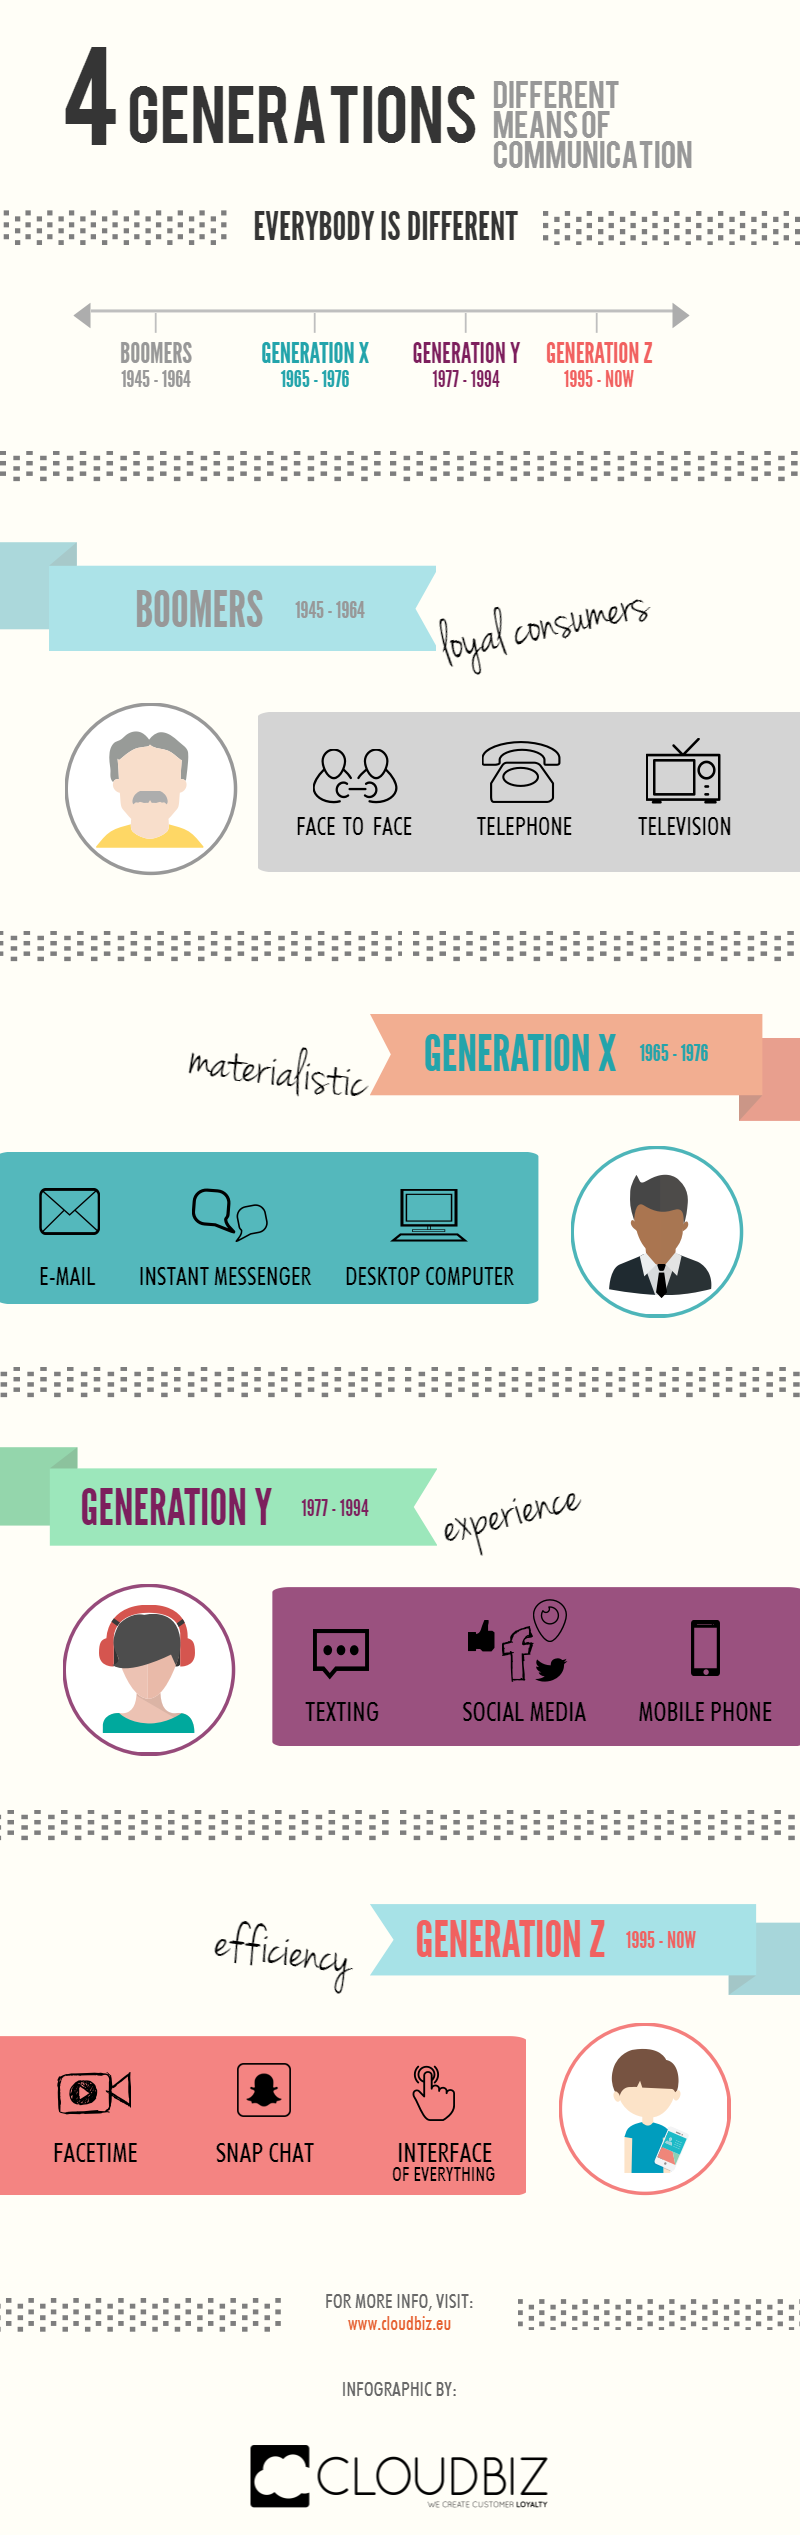 Infopgraphic about different generations